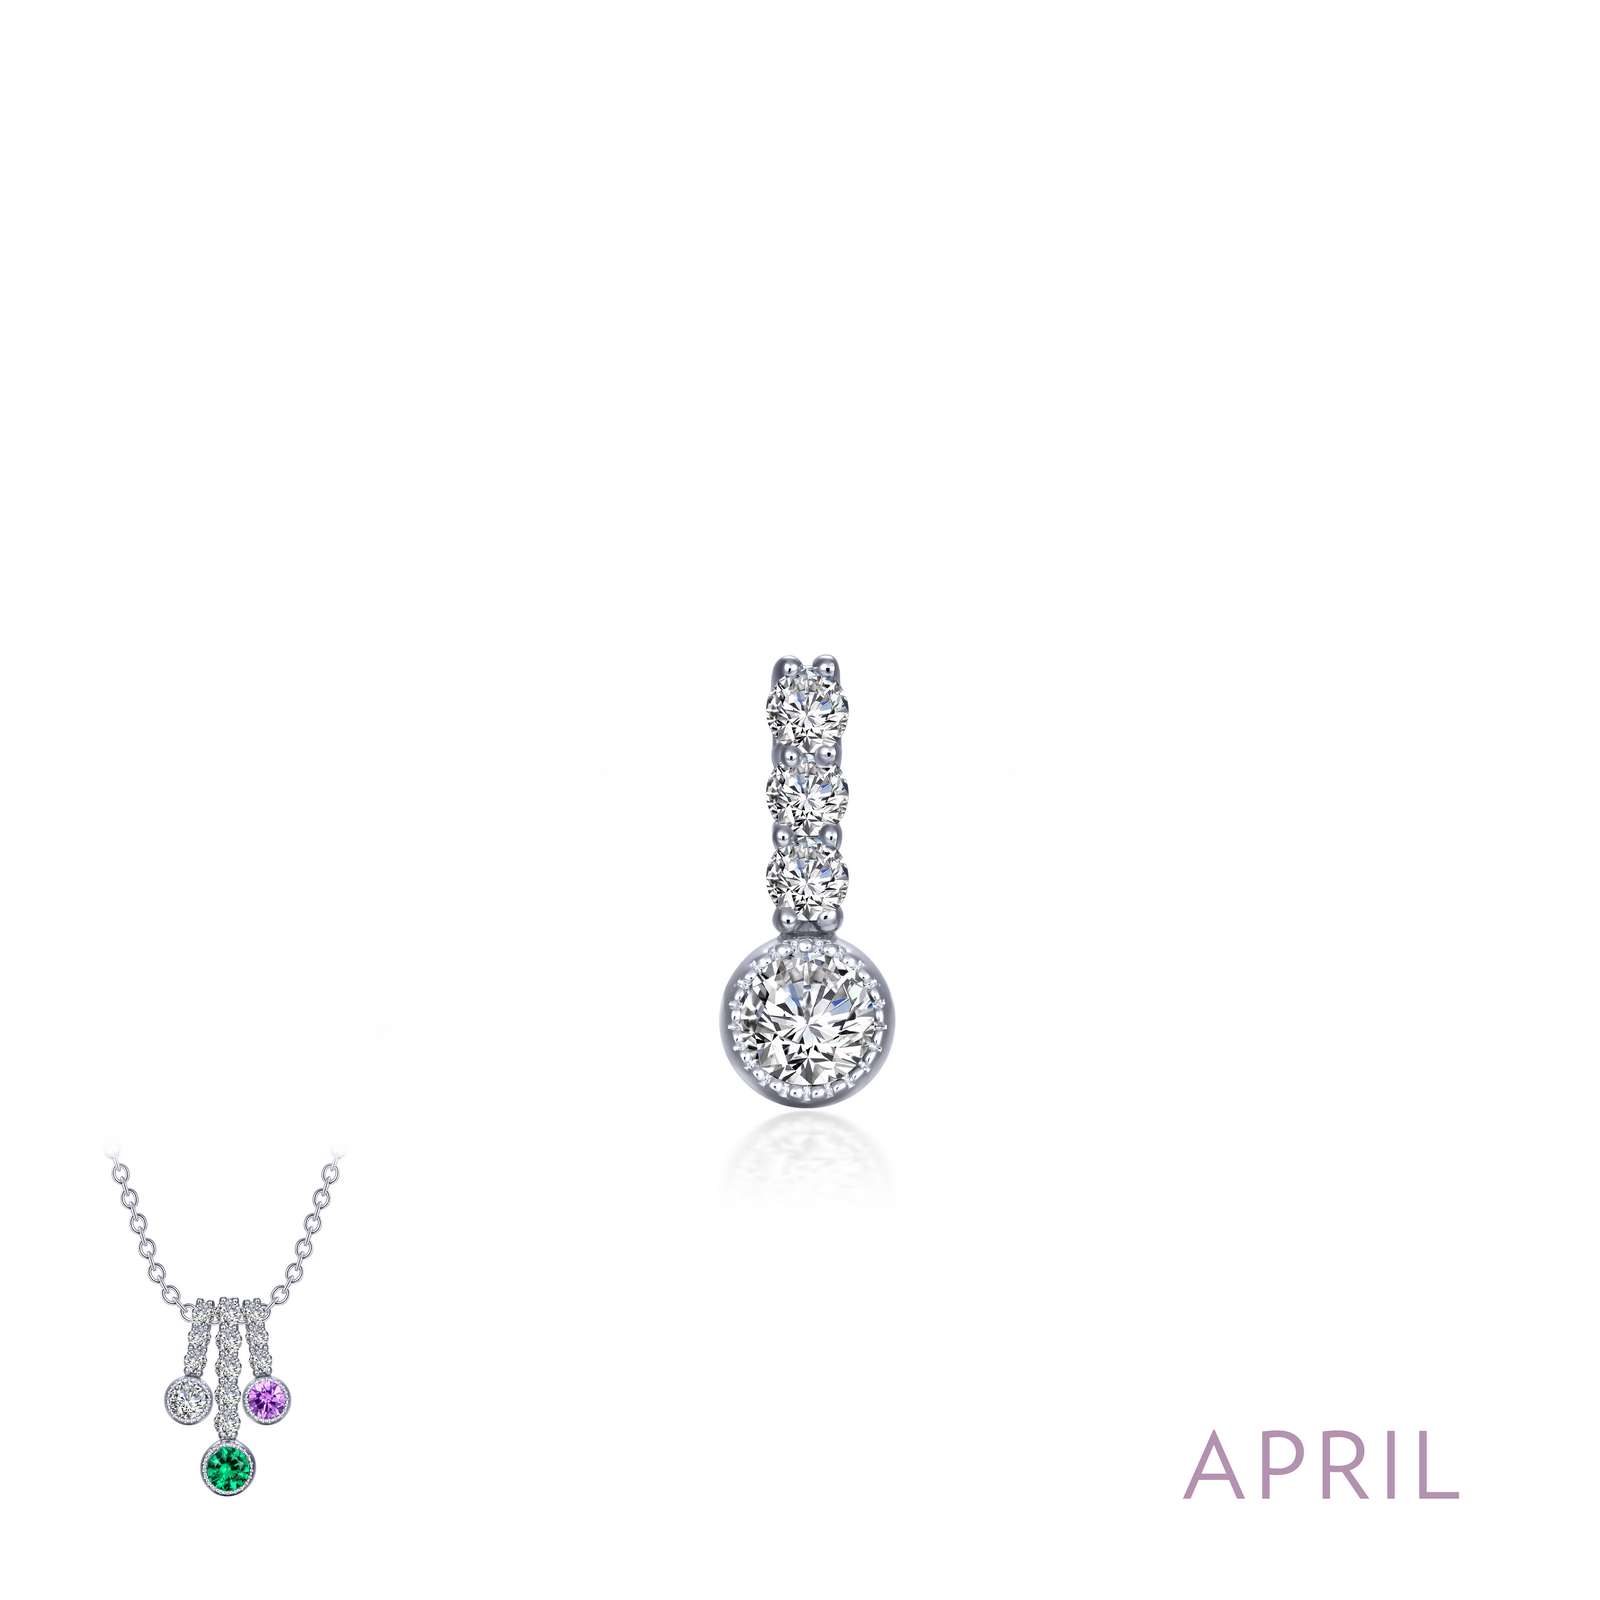 April Birthstone Love Pendant Griner Jewelry Co. Moultrie, GA